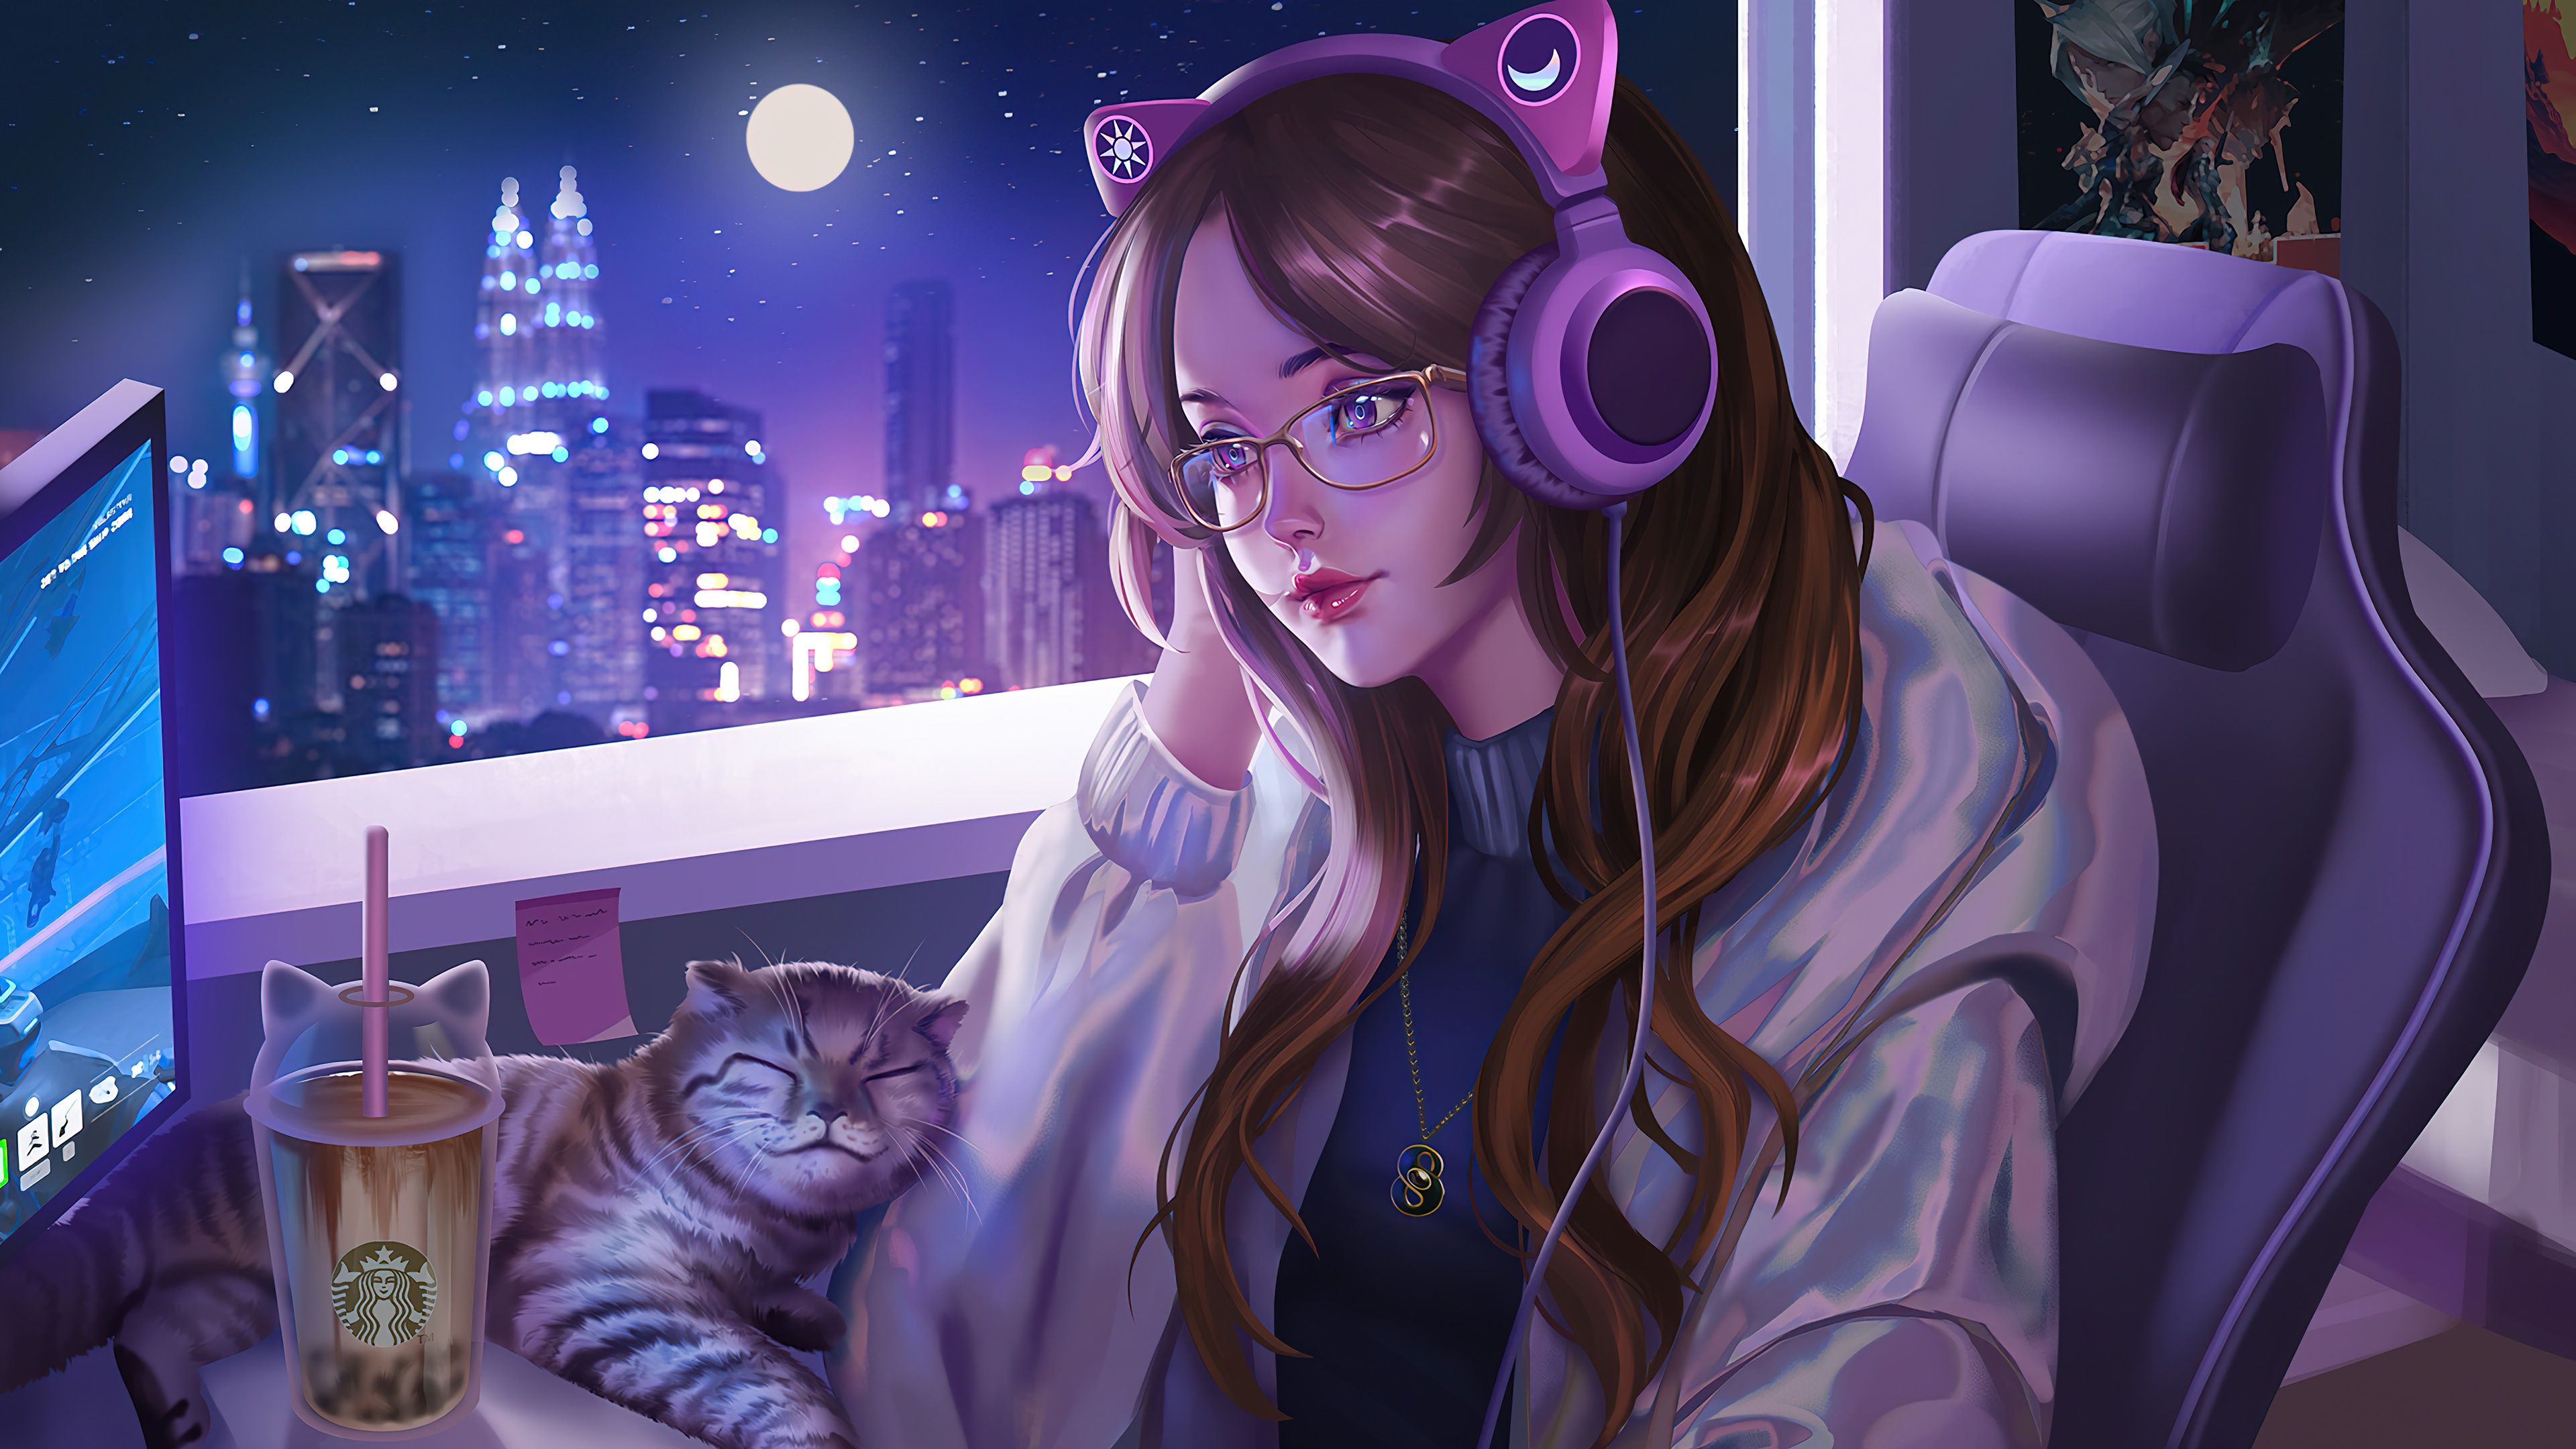 A girl wearing headphones sitting next to a cat with a cityscape in the background - Lo fi